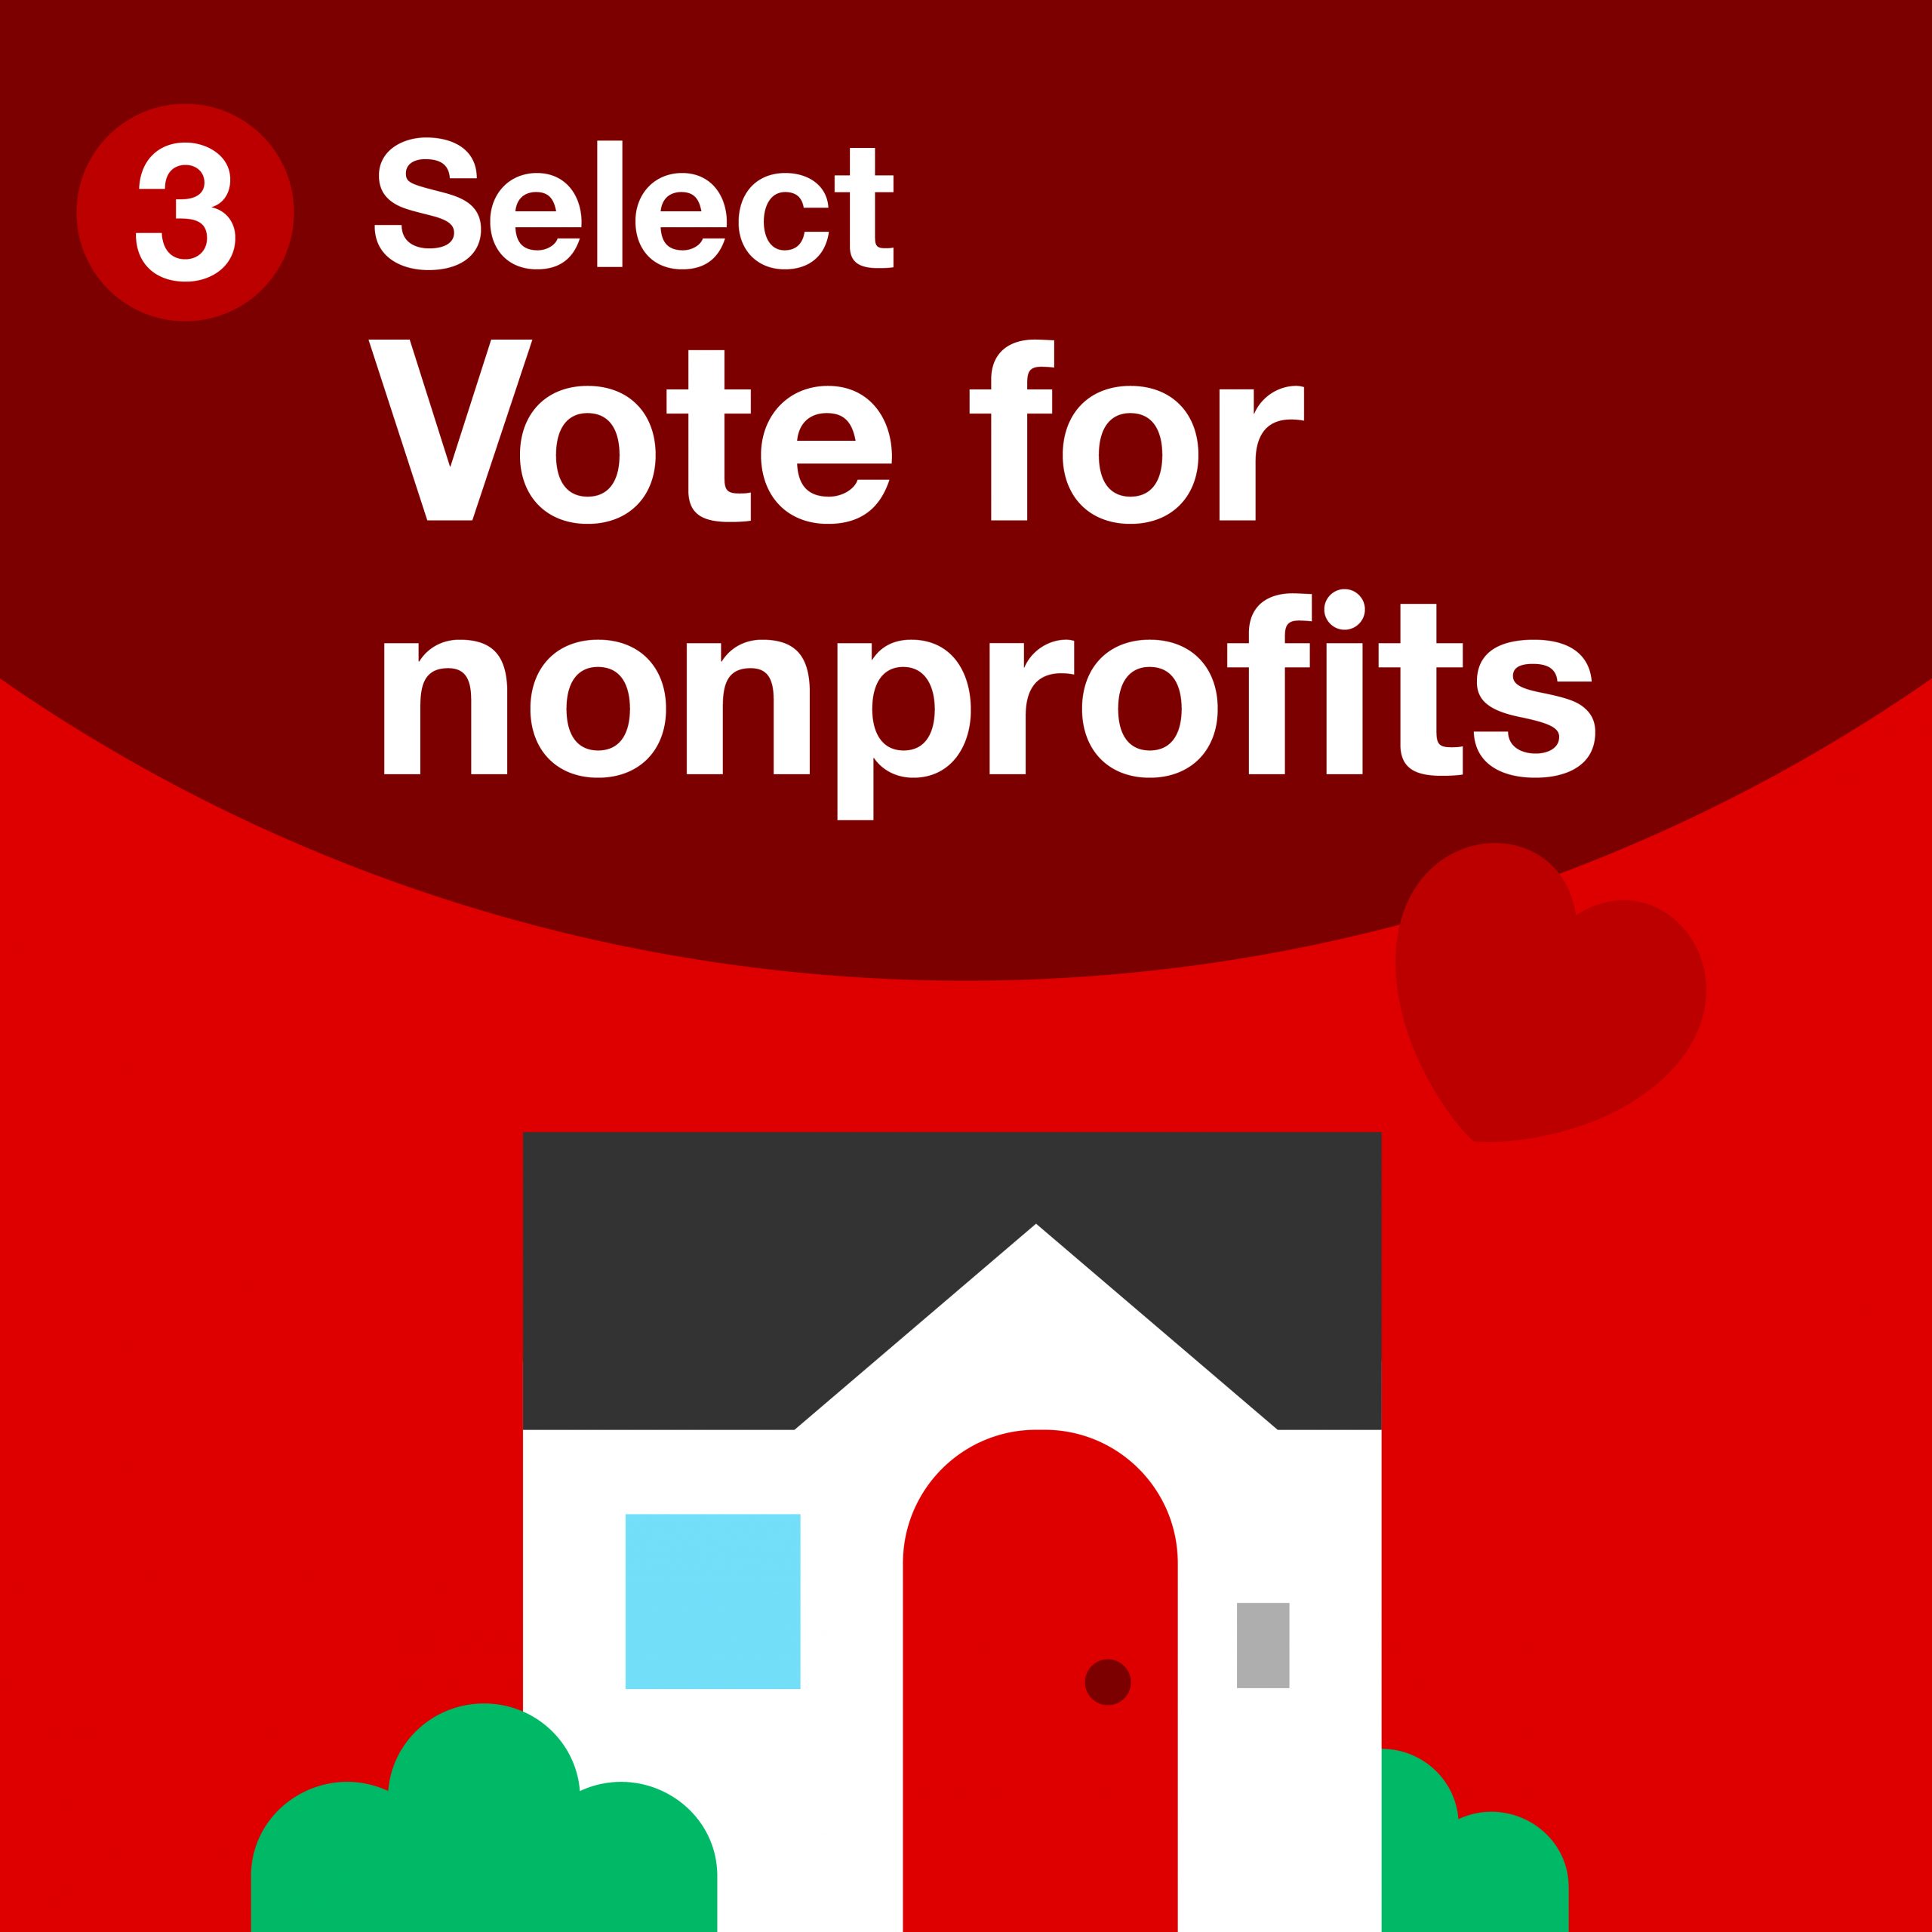 Select Nonprofits and Choose The Carousel Center